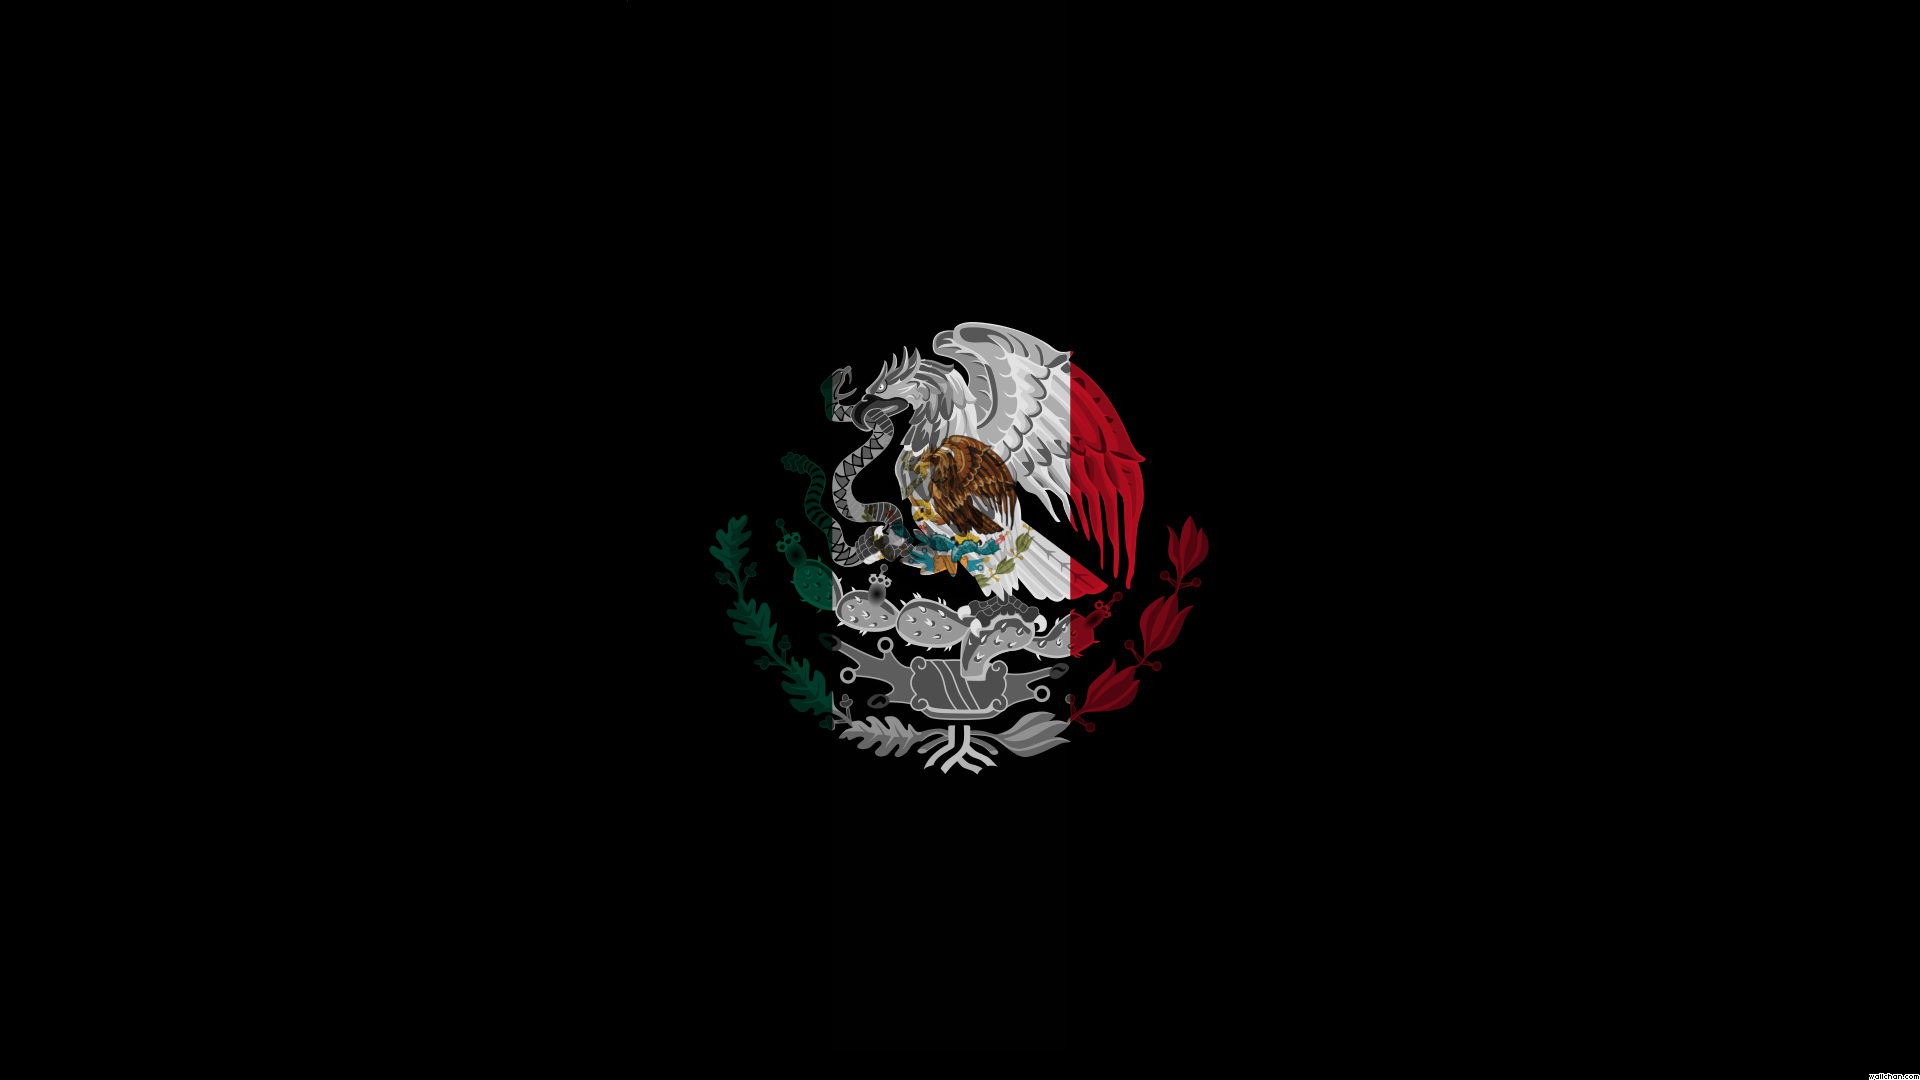 Cool Mexico Flag Wallpaper. Places to Visit